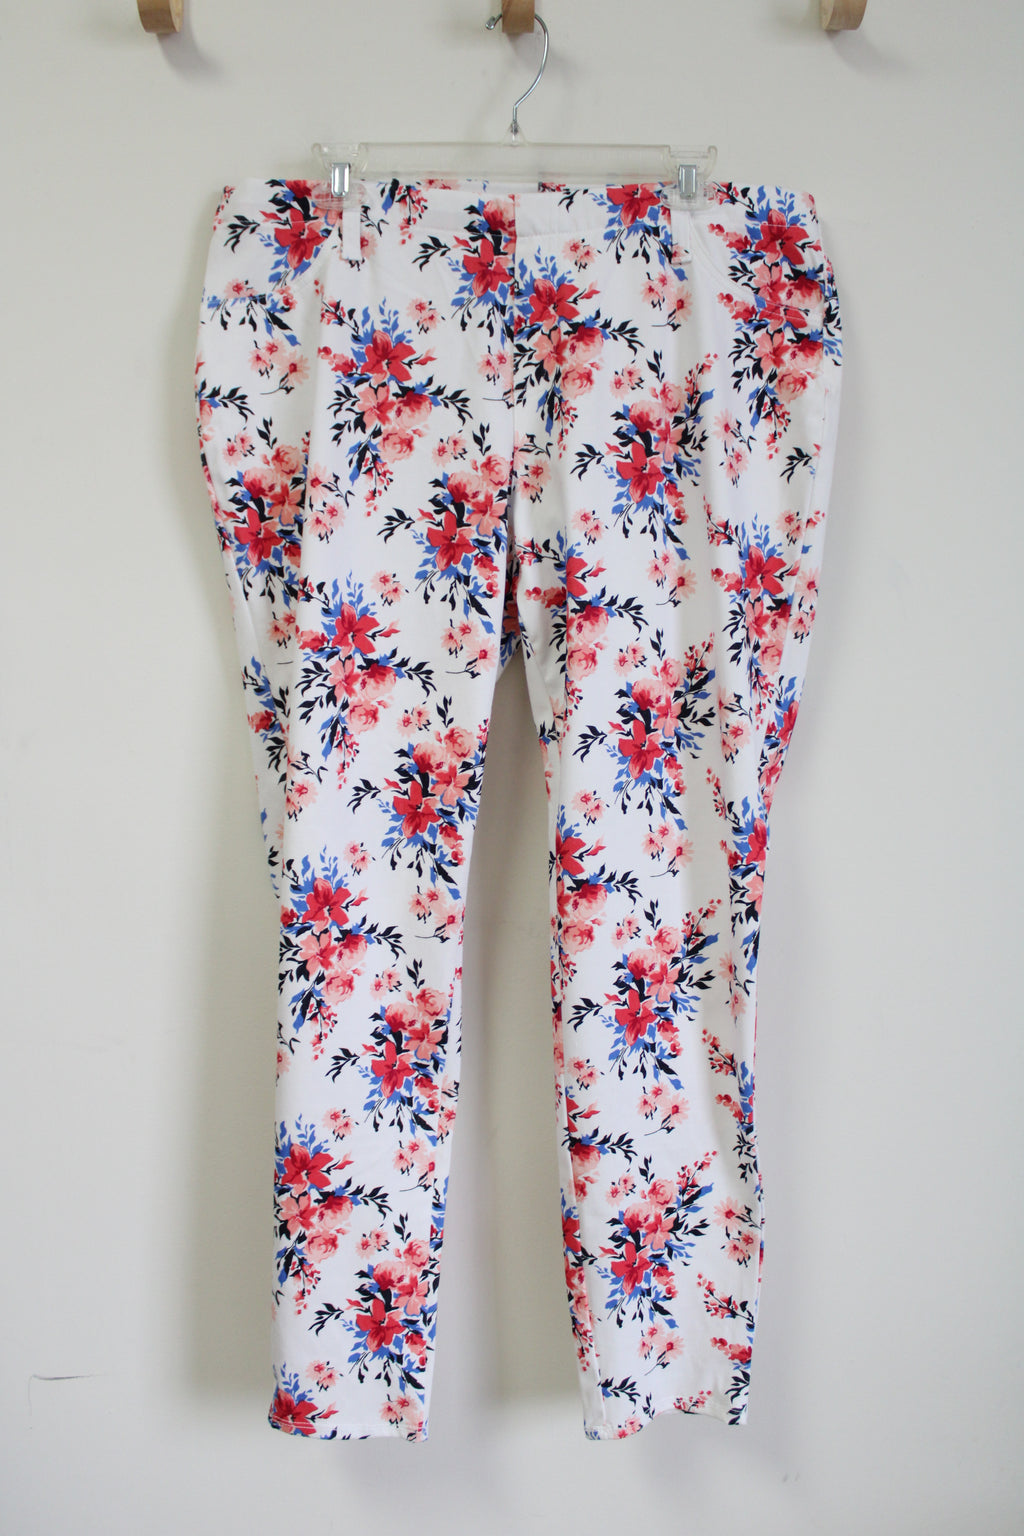 NEW Faded Glory White Floral Stretch Pant | XL (16/18)